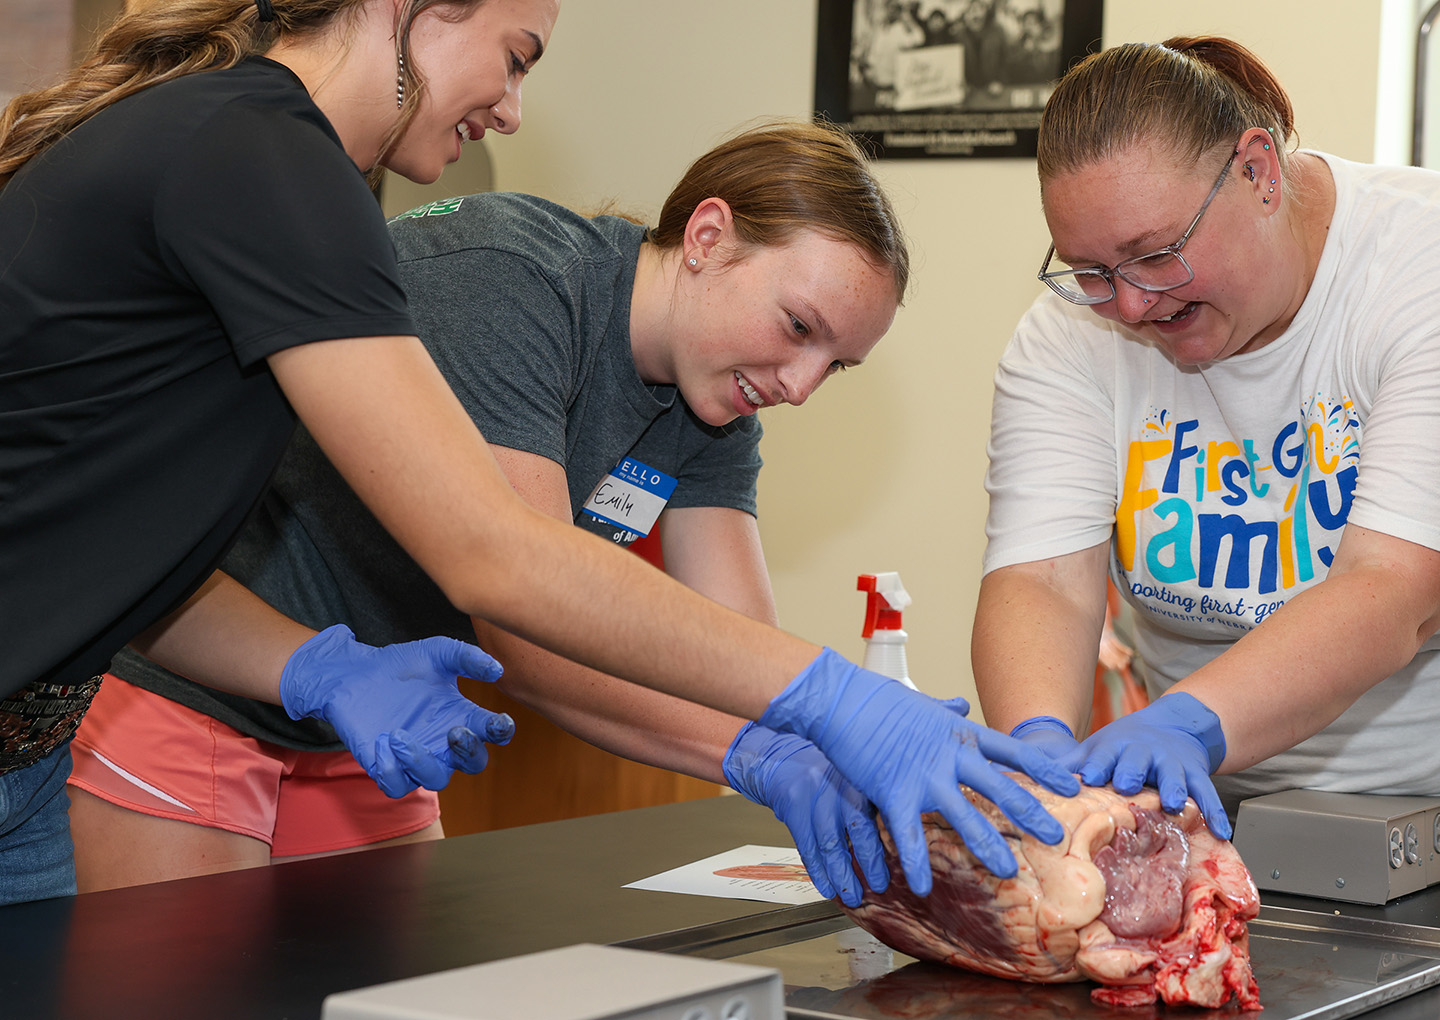 From left, Allison Heath of Cody and Emily Endorf of Pierce dissect a beef heart with assistance from UNK biology lecturer Alexis Hobbs.